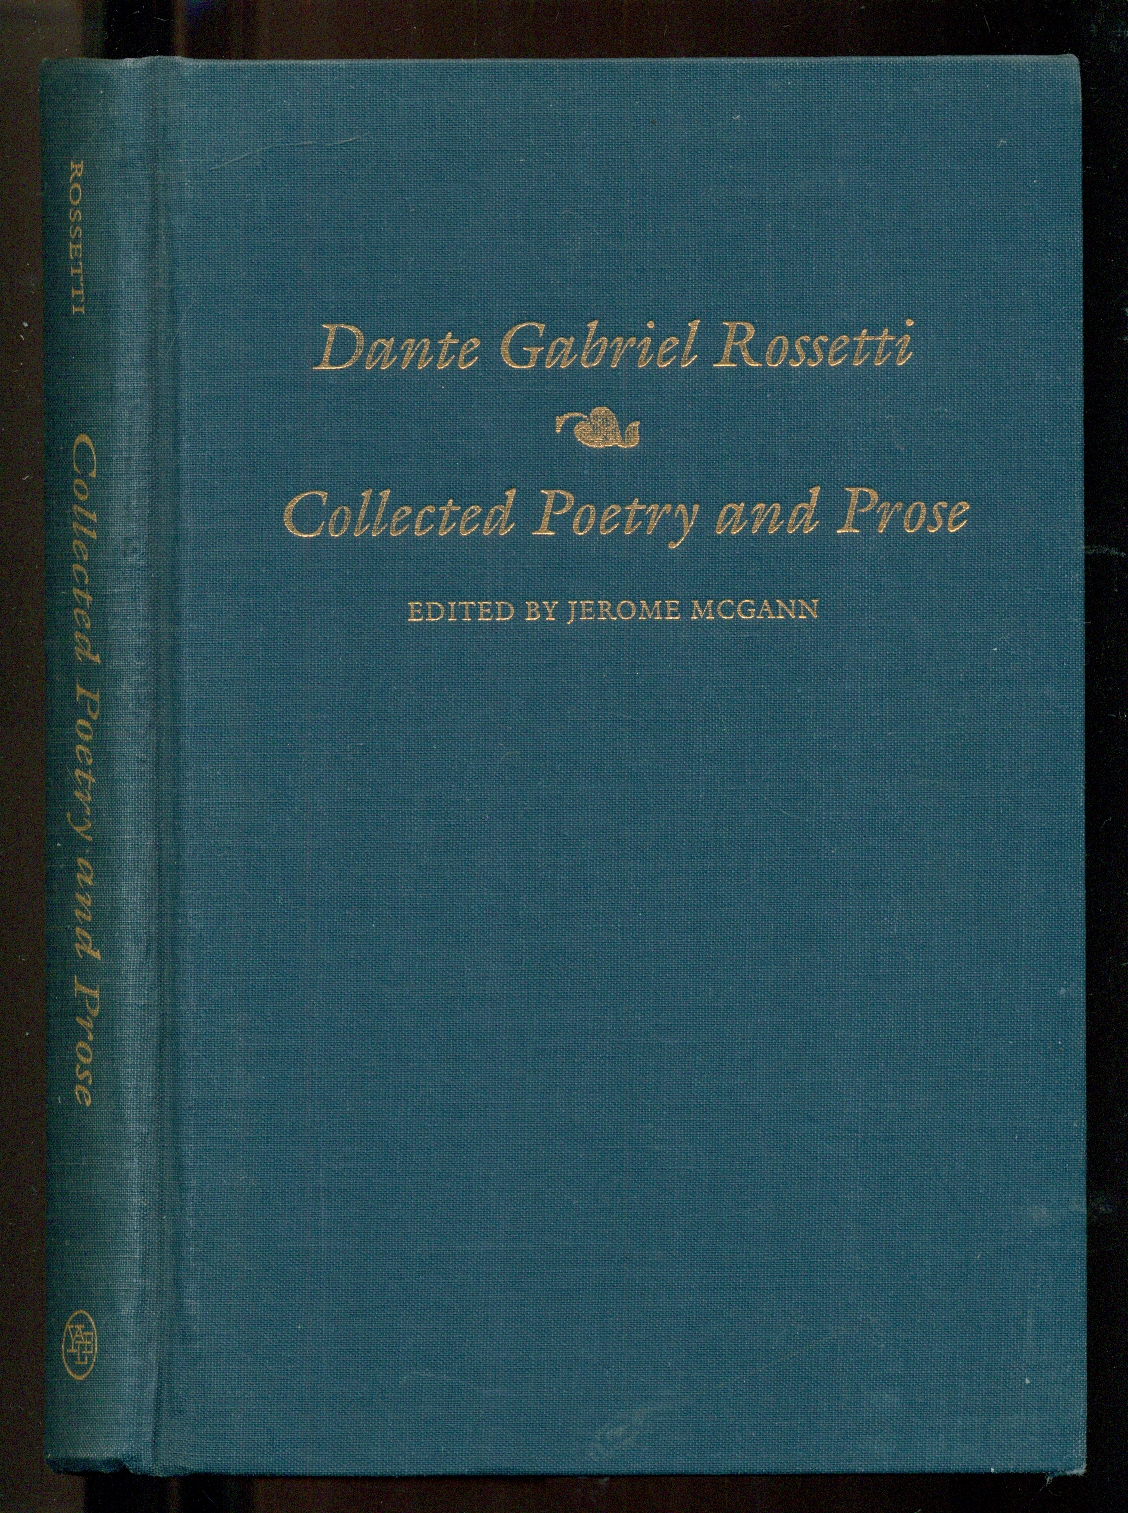 Collected Poetry and Prose - Rossetti, Dante Gabriel; McGann, Jerome - Editor